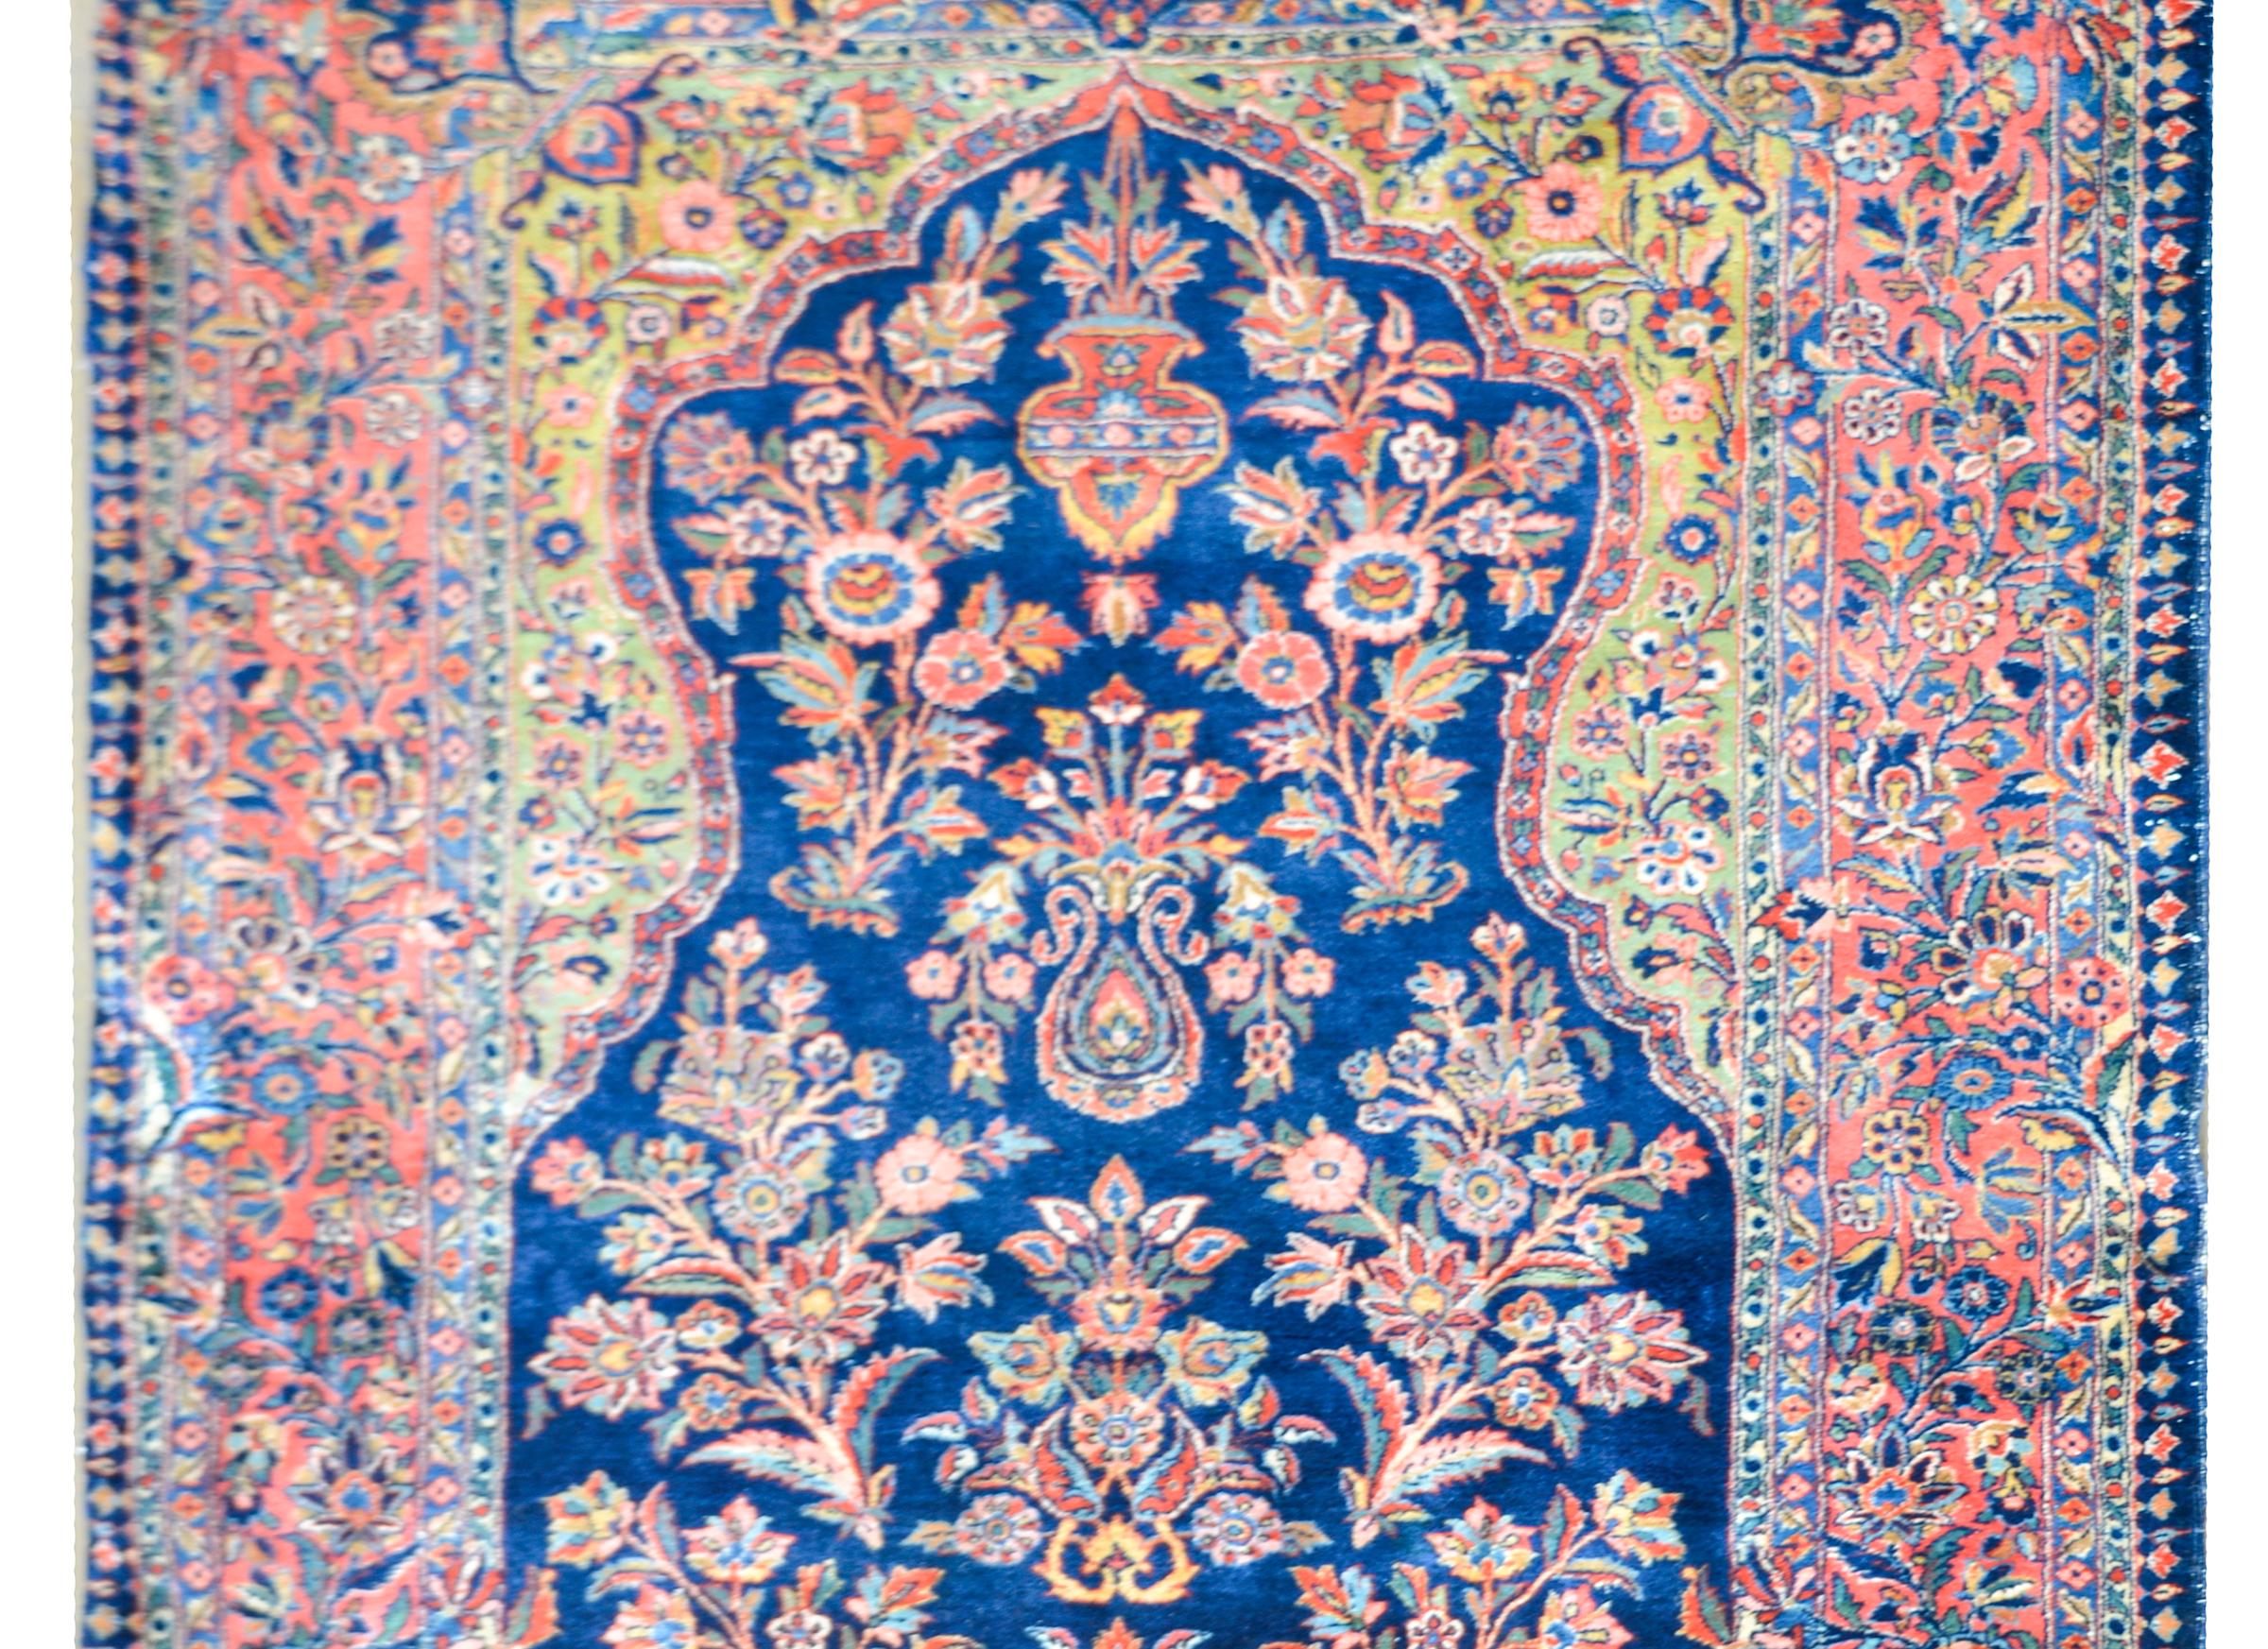 An early 20th century Persian Kashan prayer rug with a wonderful floral pattern woven in myriad colors including crimson, pink, gold and white, against a dark indigo background, and surrounded by an elaborately clustered floral patterned border